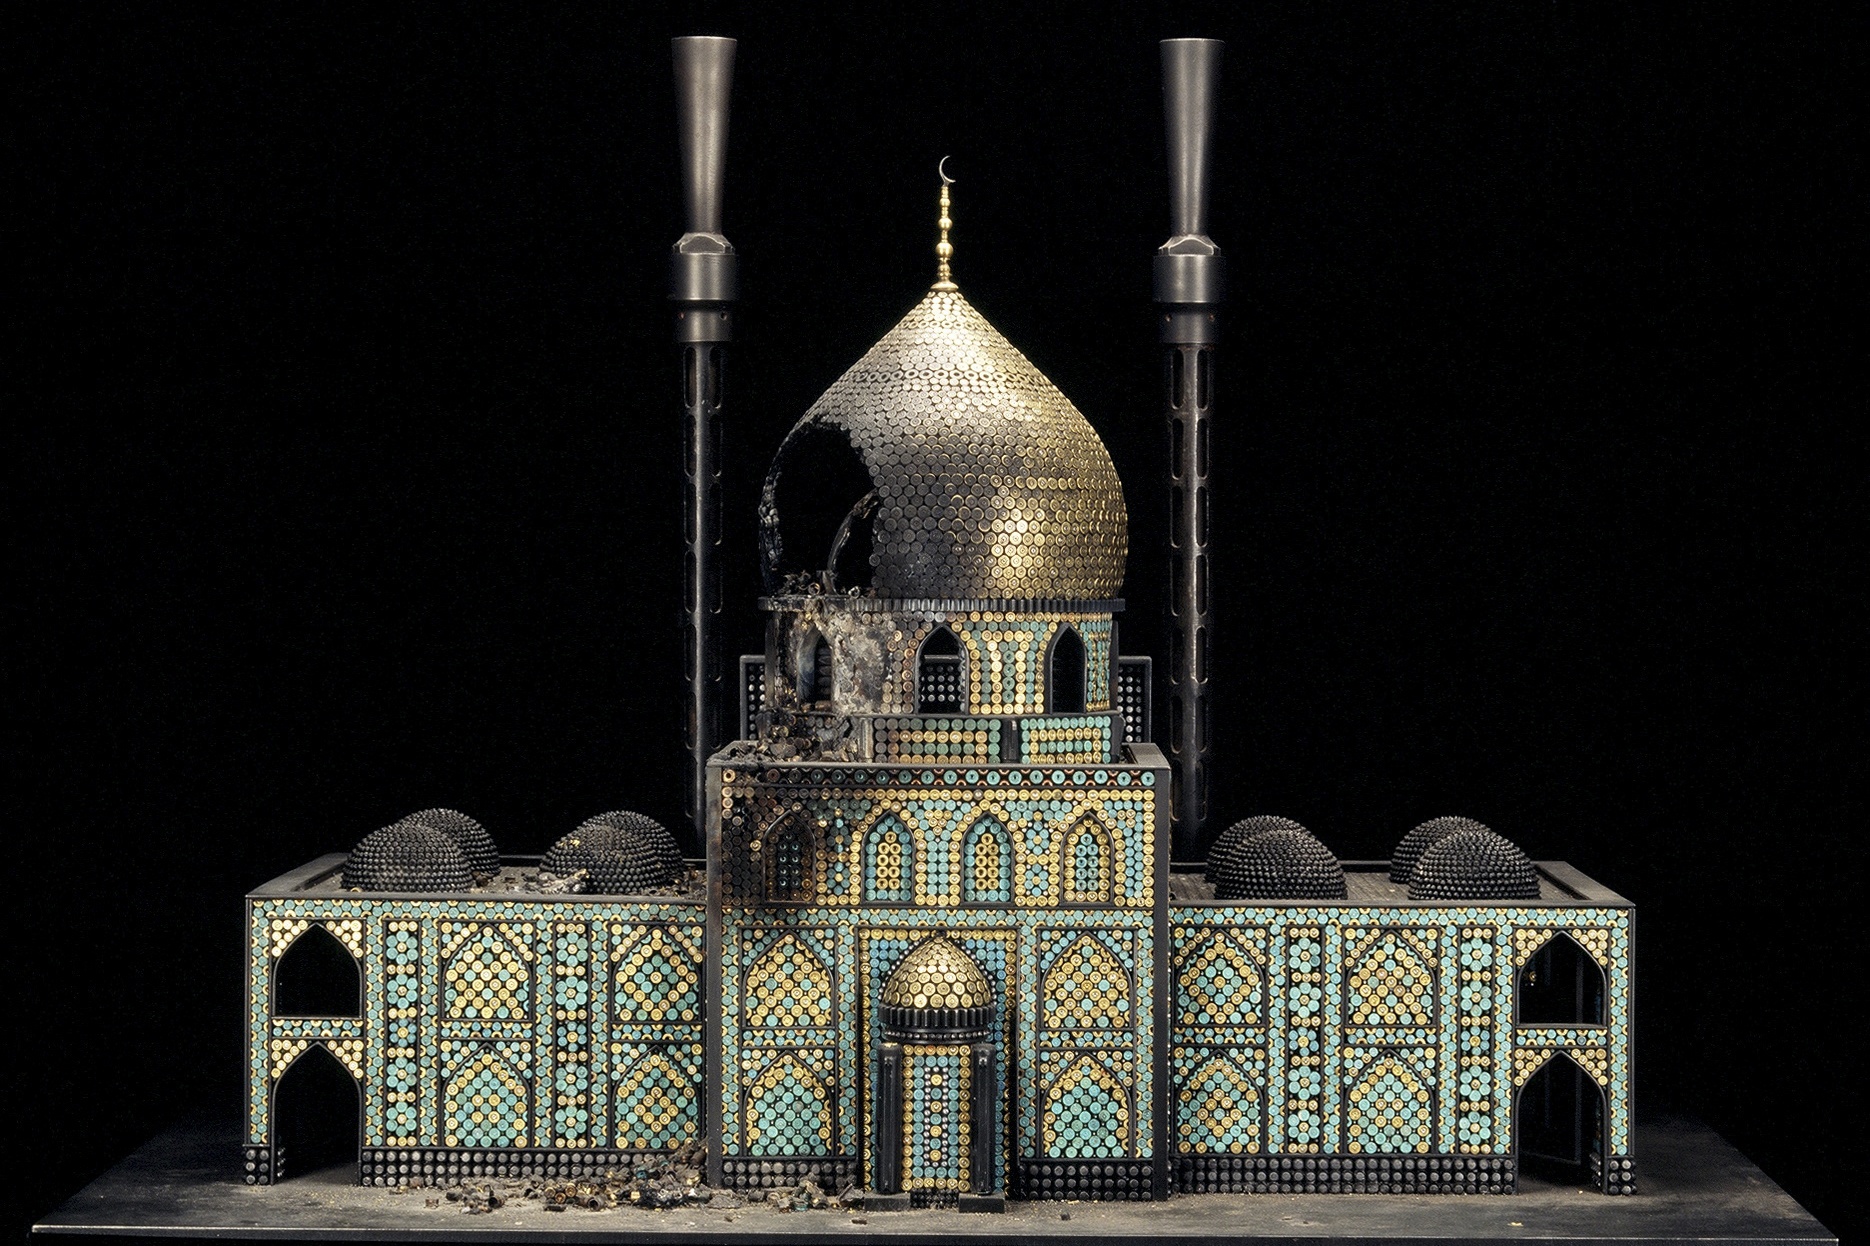 Al Farrow’s “Divine Ammunition” Turns Instruments of Death Into Houses of Worship